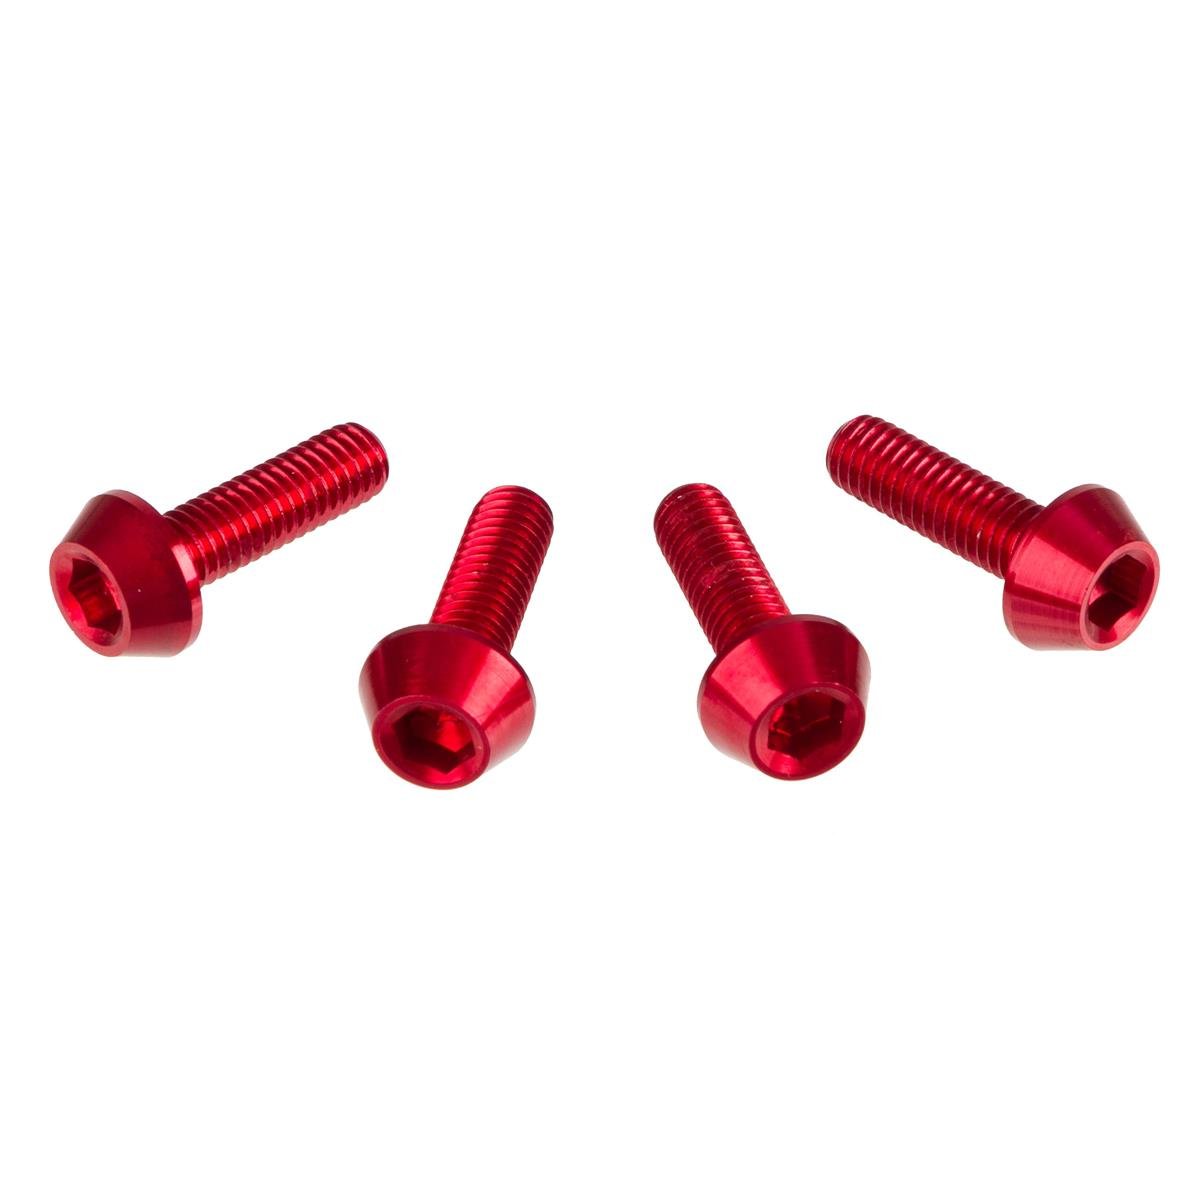 DRC Inner Hex Bolts  M6 x 20 mm, Red, Pack of 4